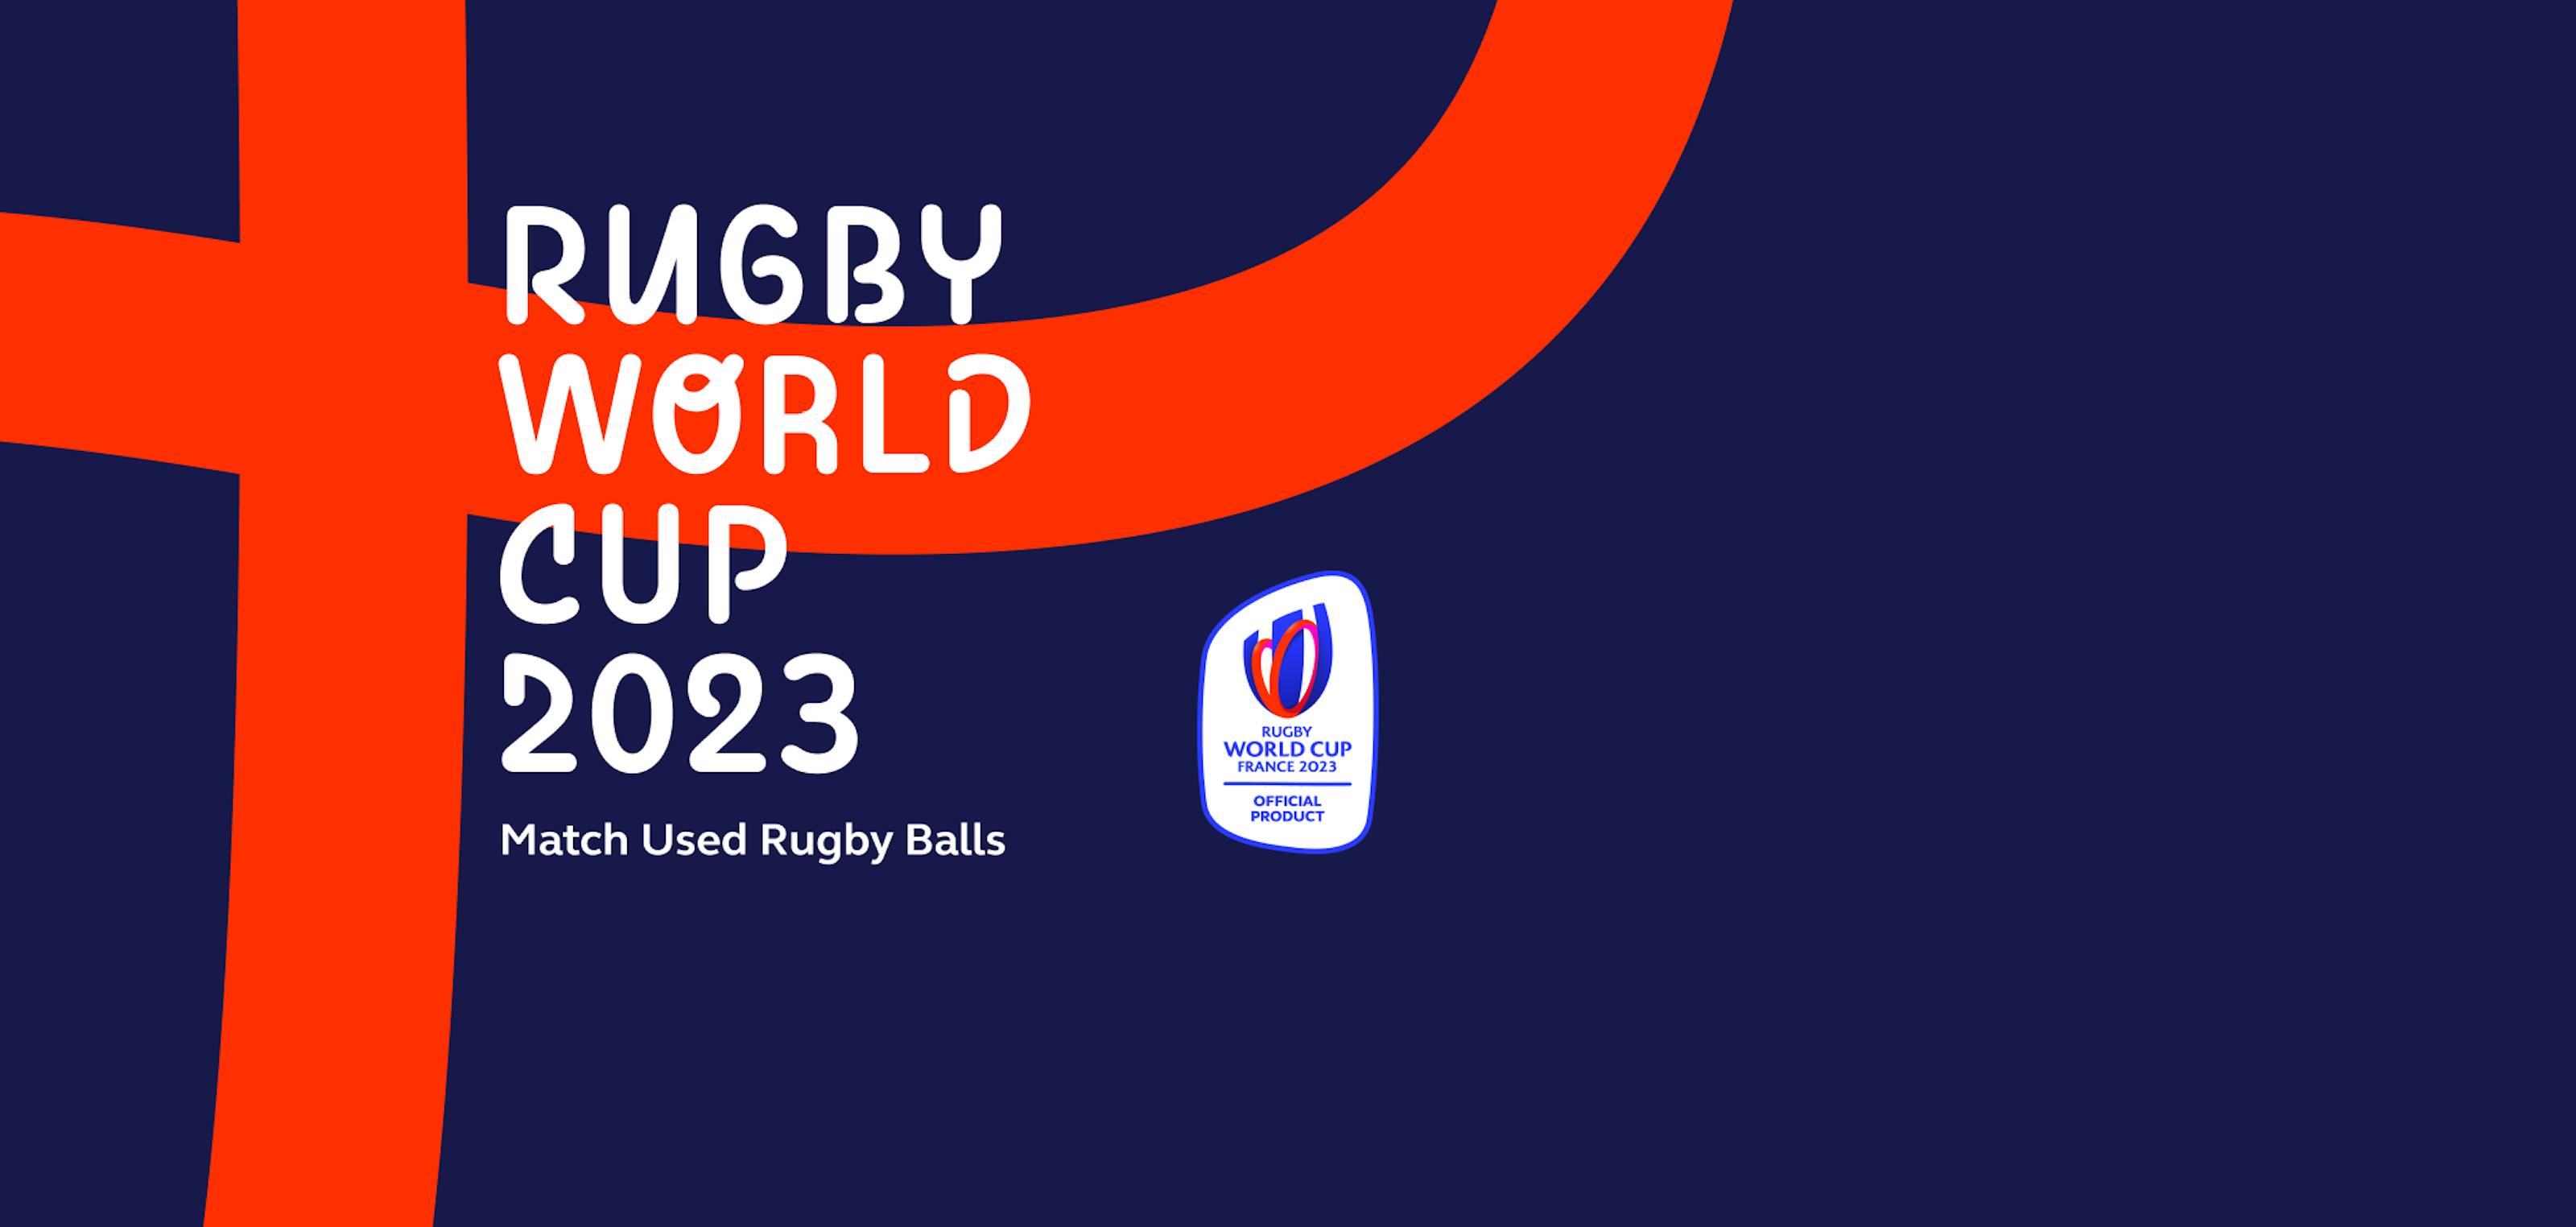 Rugby World Cup France 2023 header image